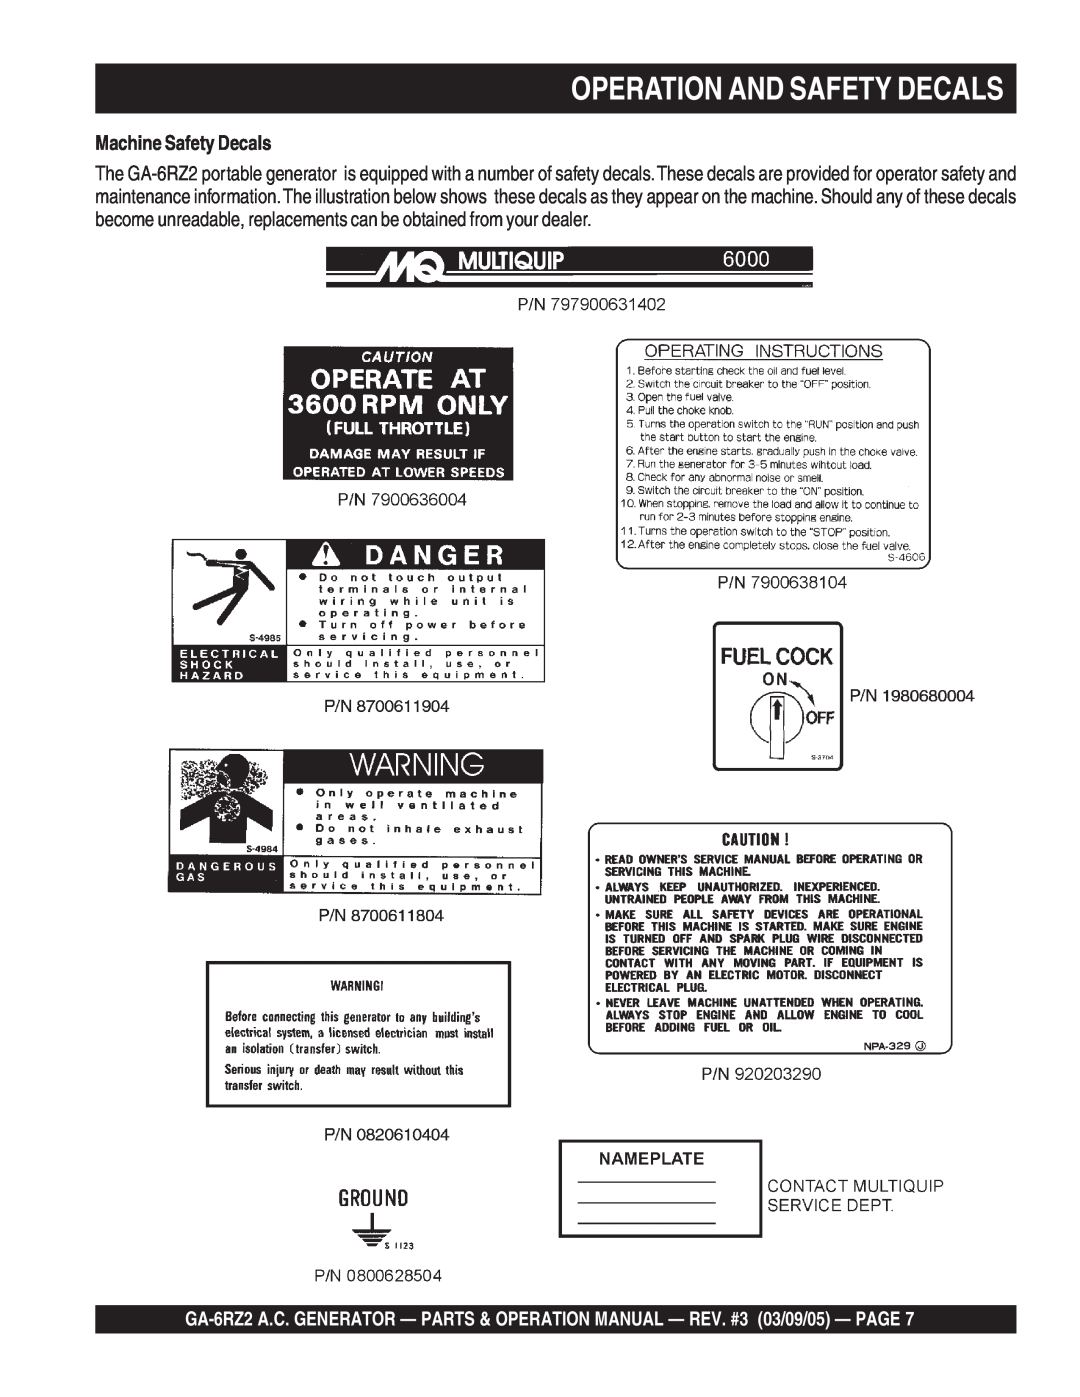 Multiquip GA-6RZ2 operation manual Operation And Safety Decals, Machine Safety Decals 